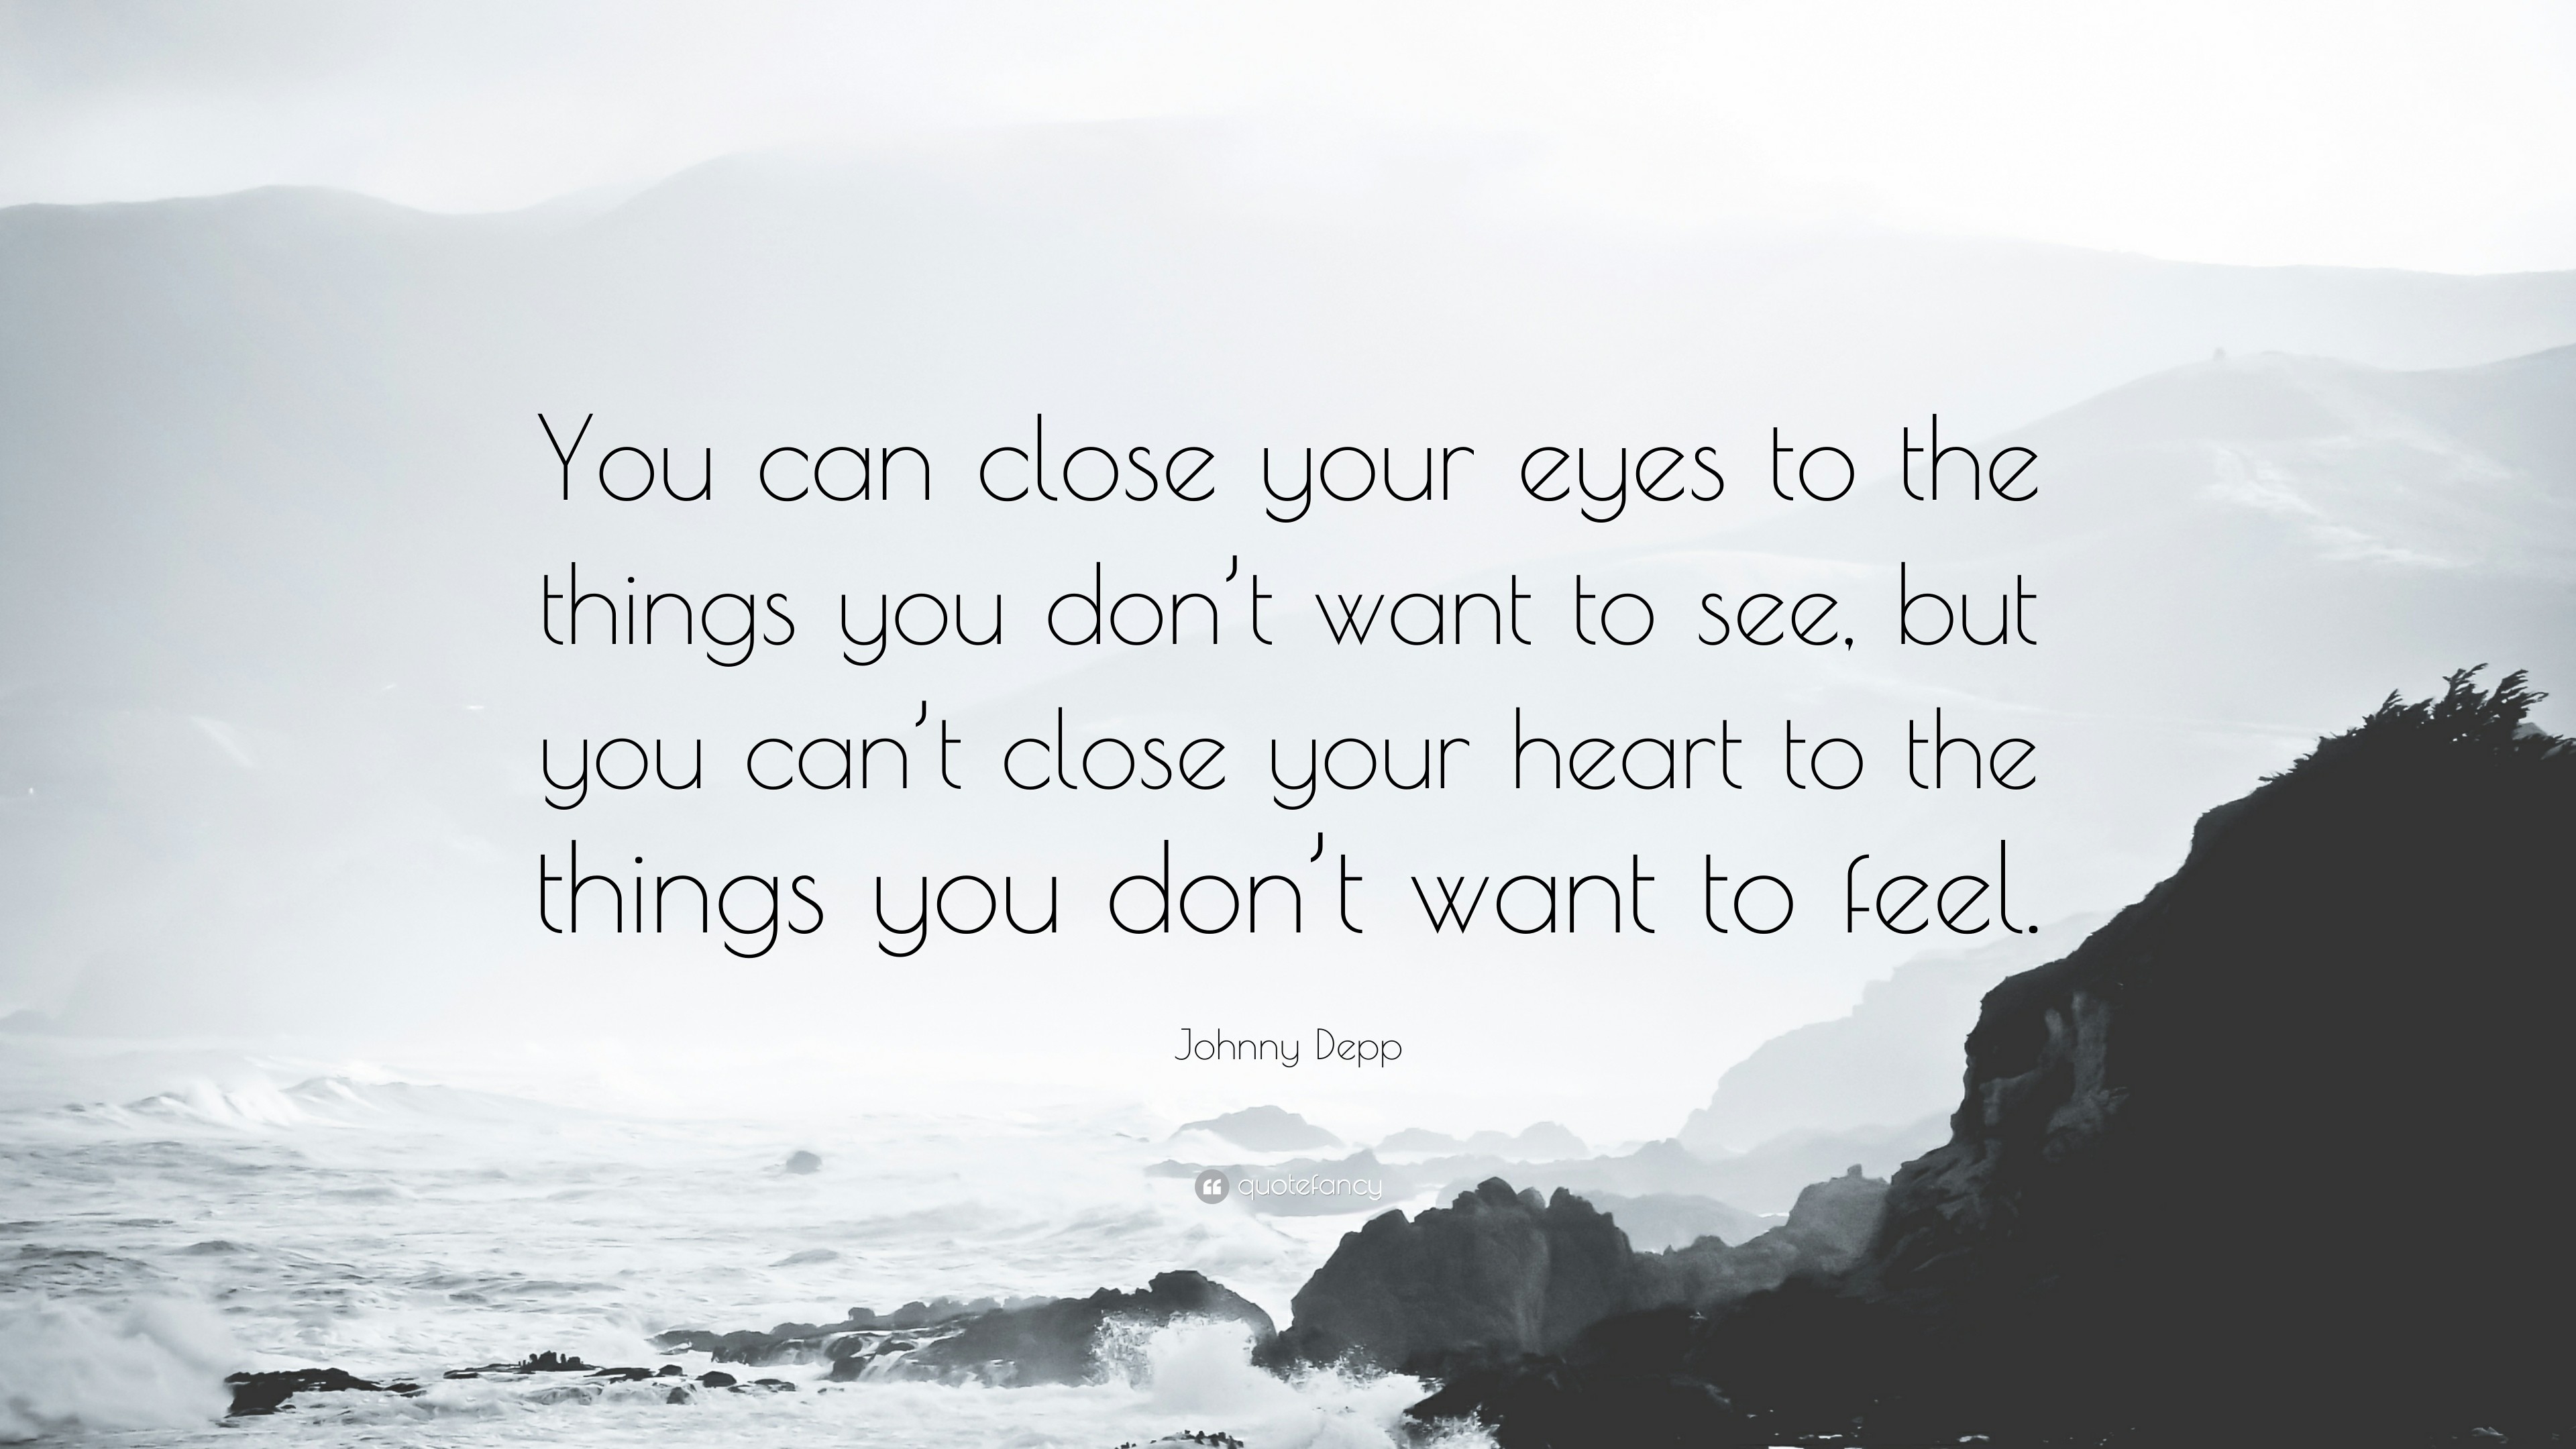 3840x2160 Broken Heart Quotes: “You can close your eyes to the things you don'